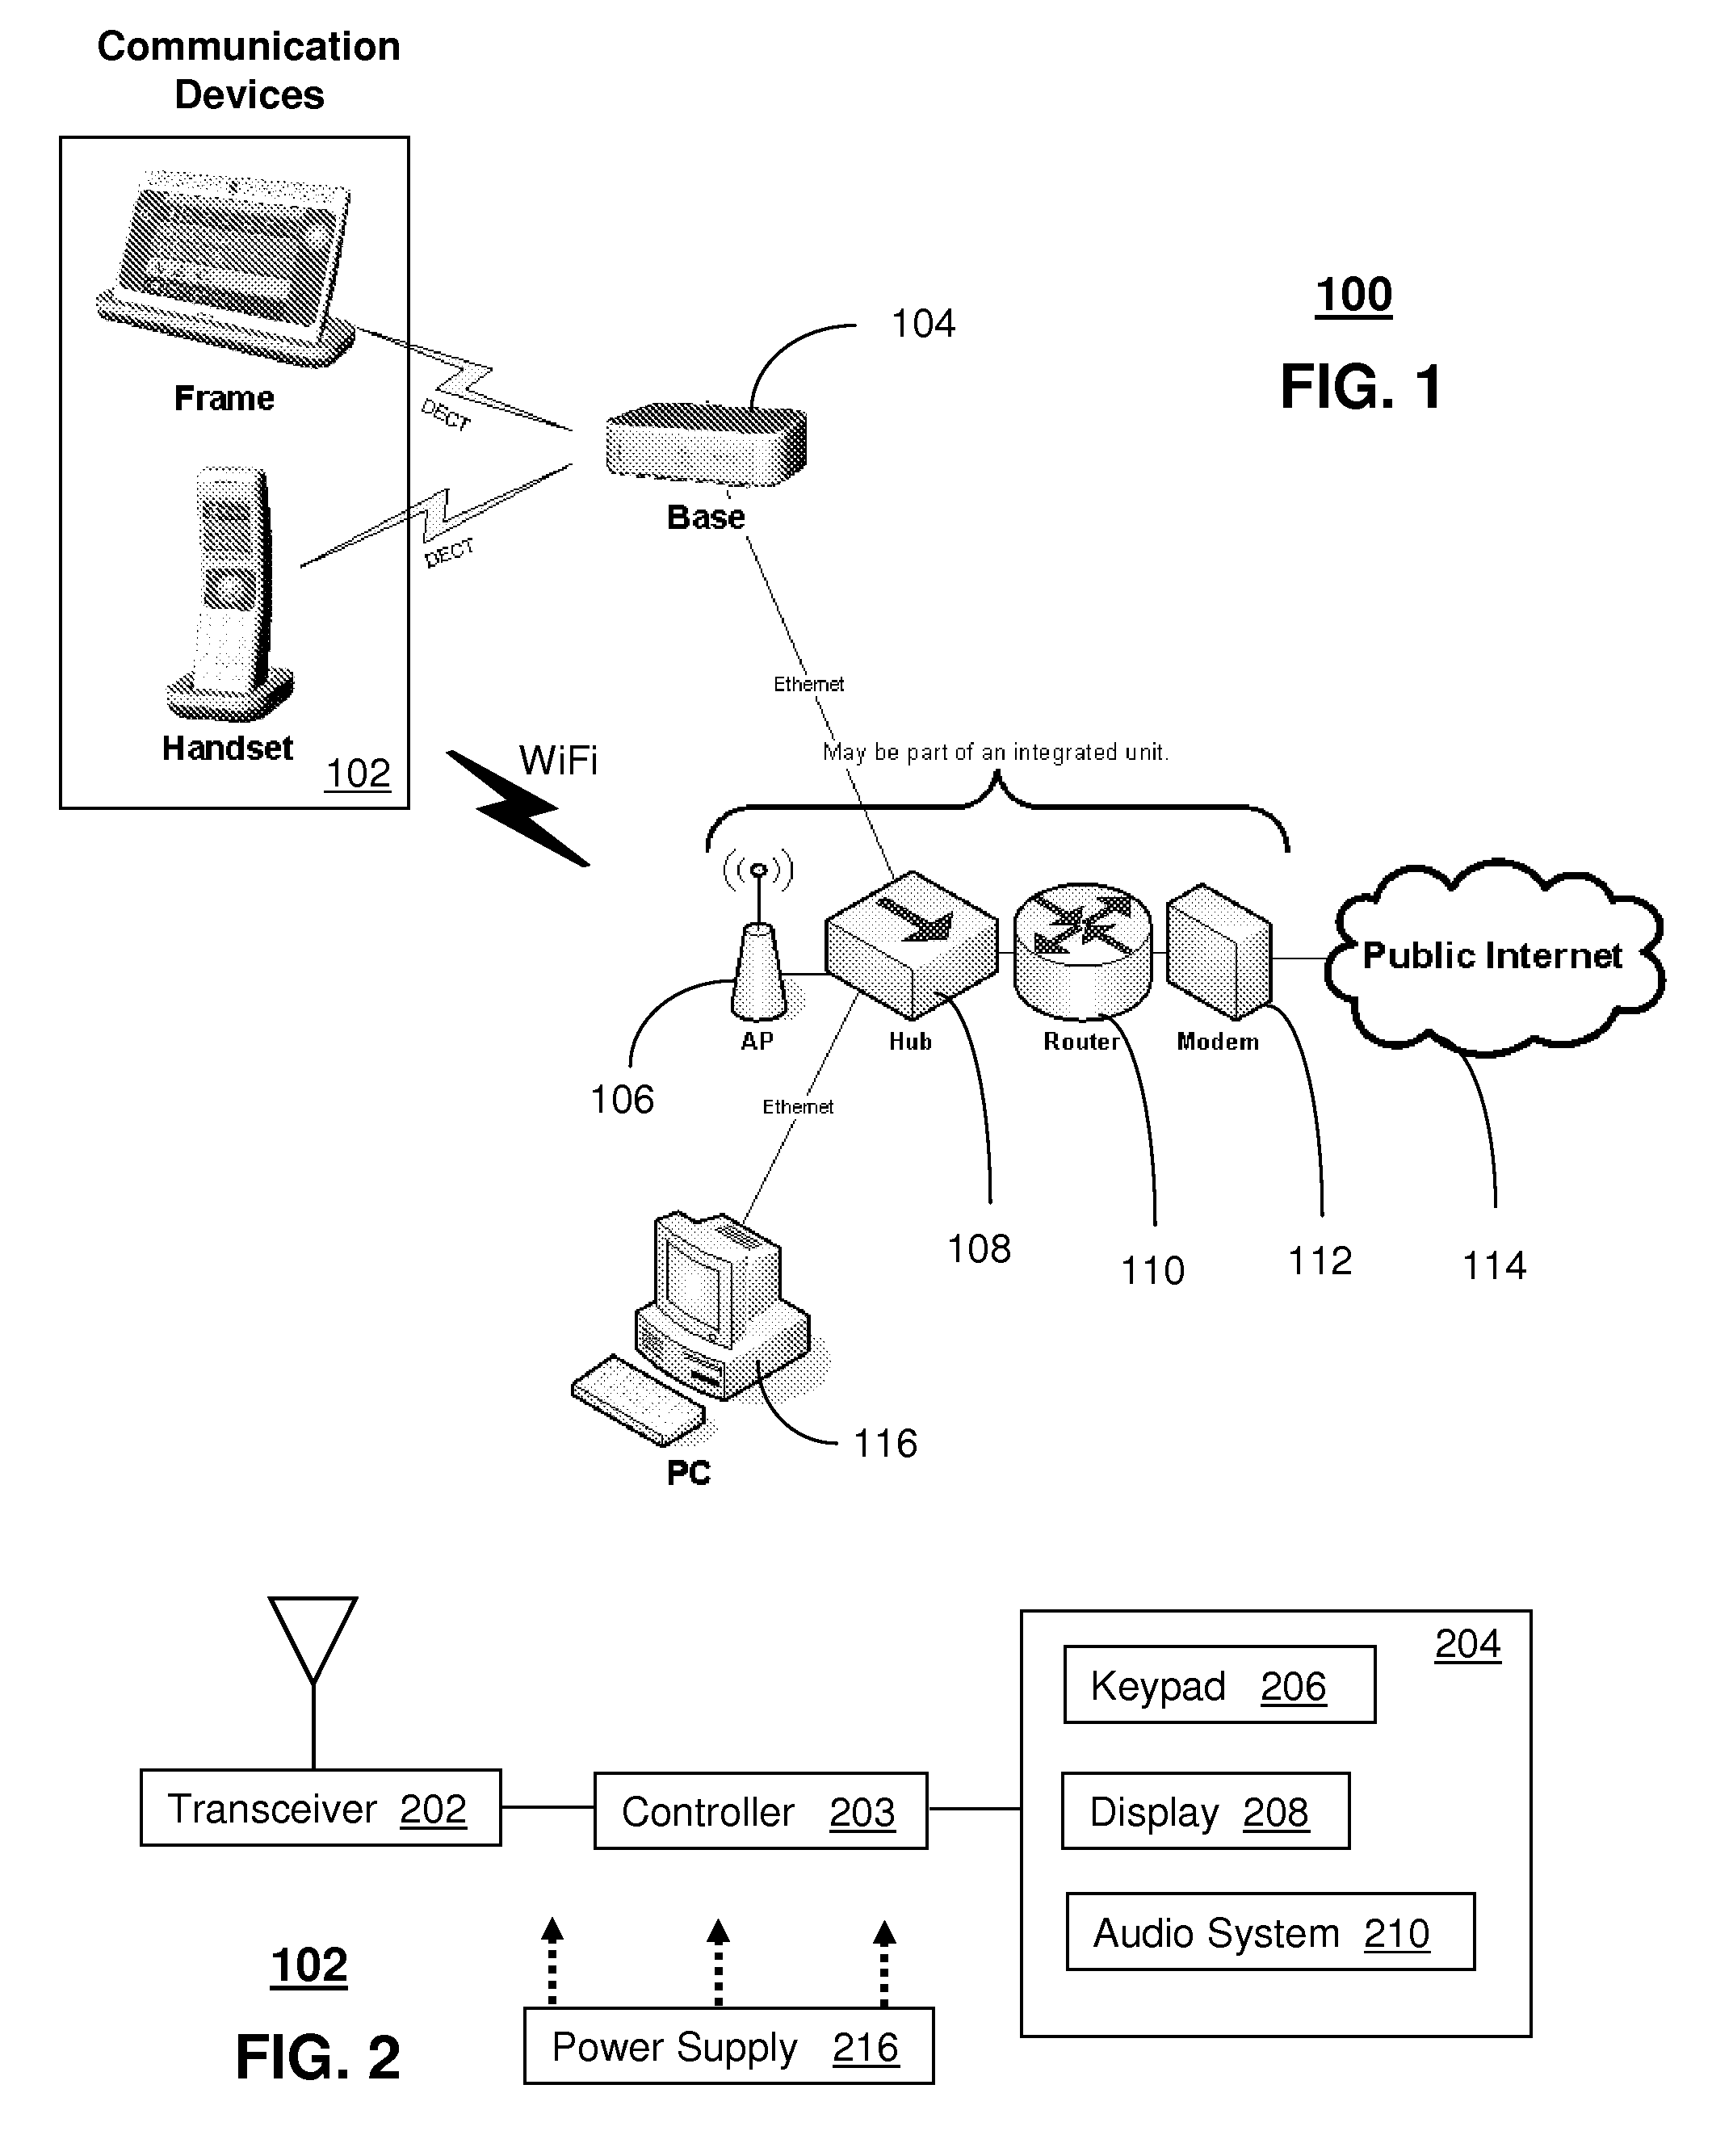 Method and apparatus for provisioning a communication device